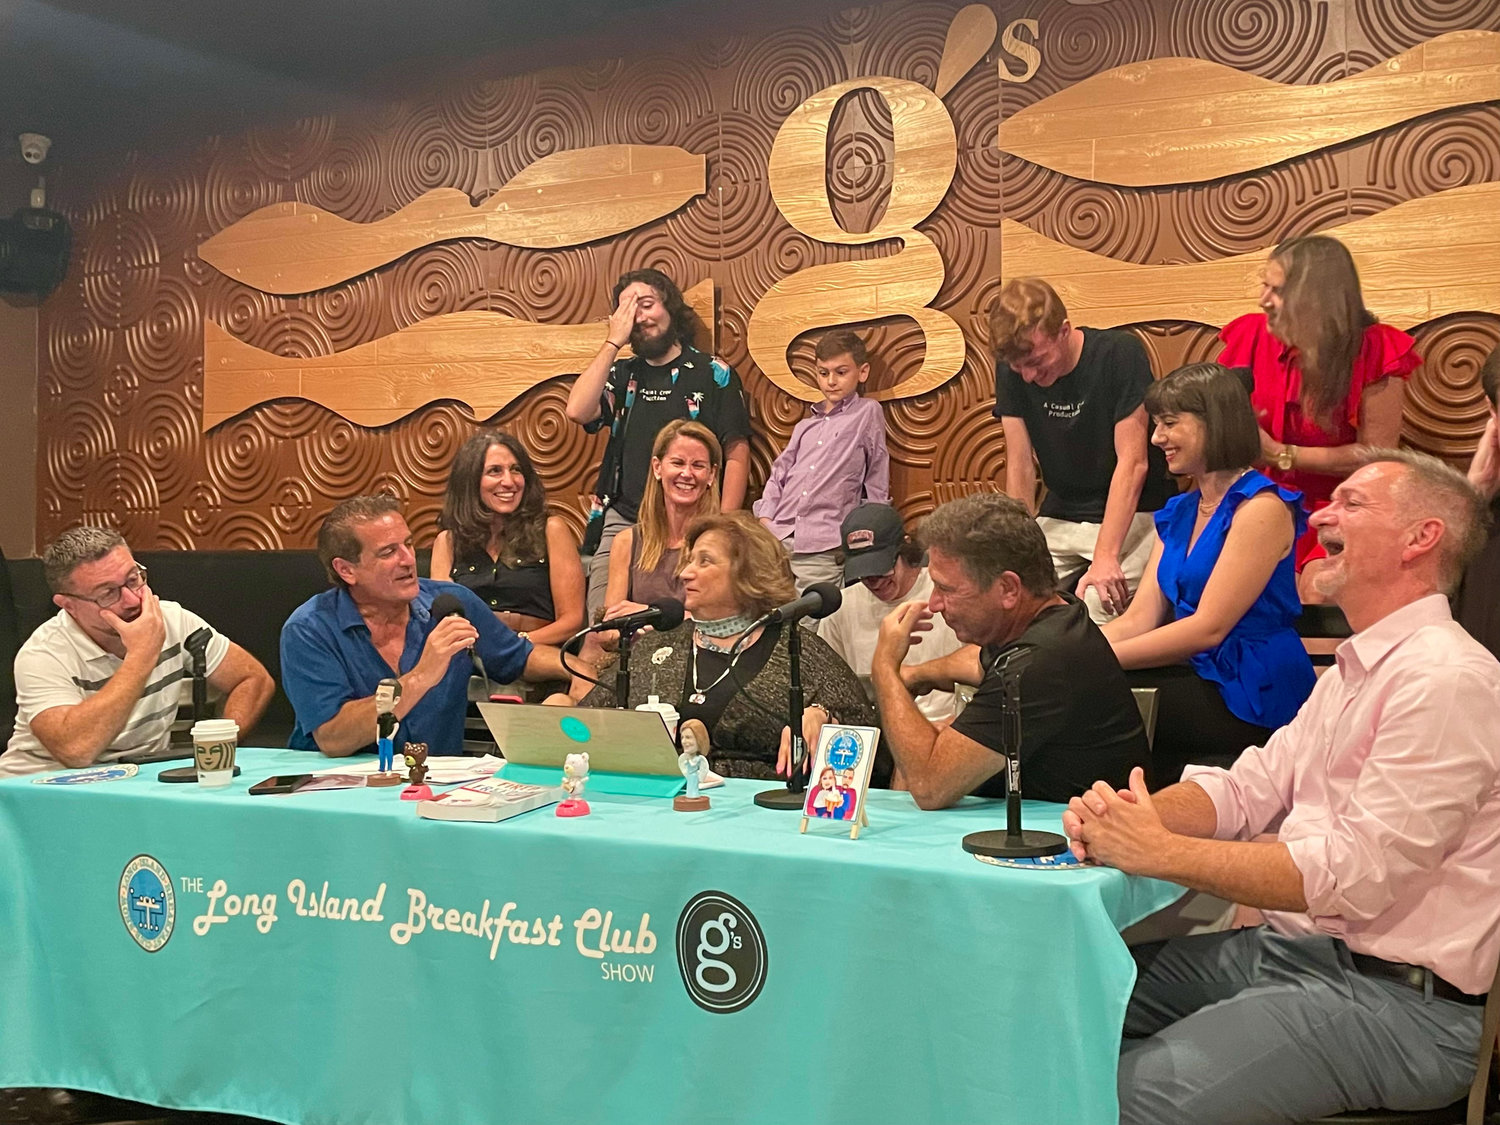 Long Island Breakfast Club Show host Valentina Janek, center, spoke with the cast of ‘The Fontanas,’ a new show in which she is also set to appear.